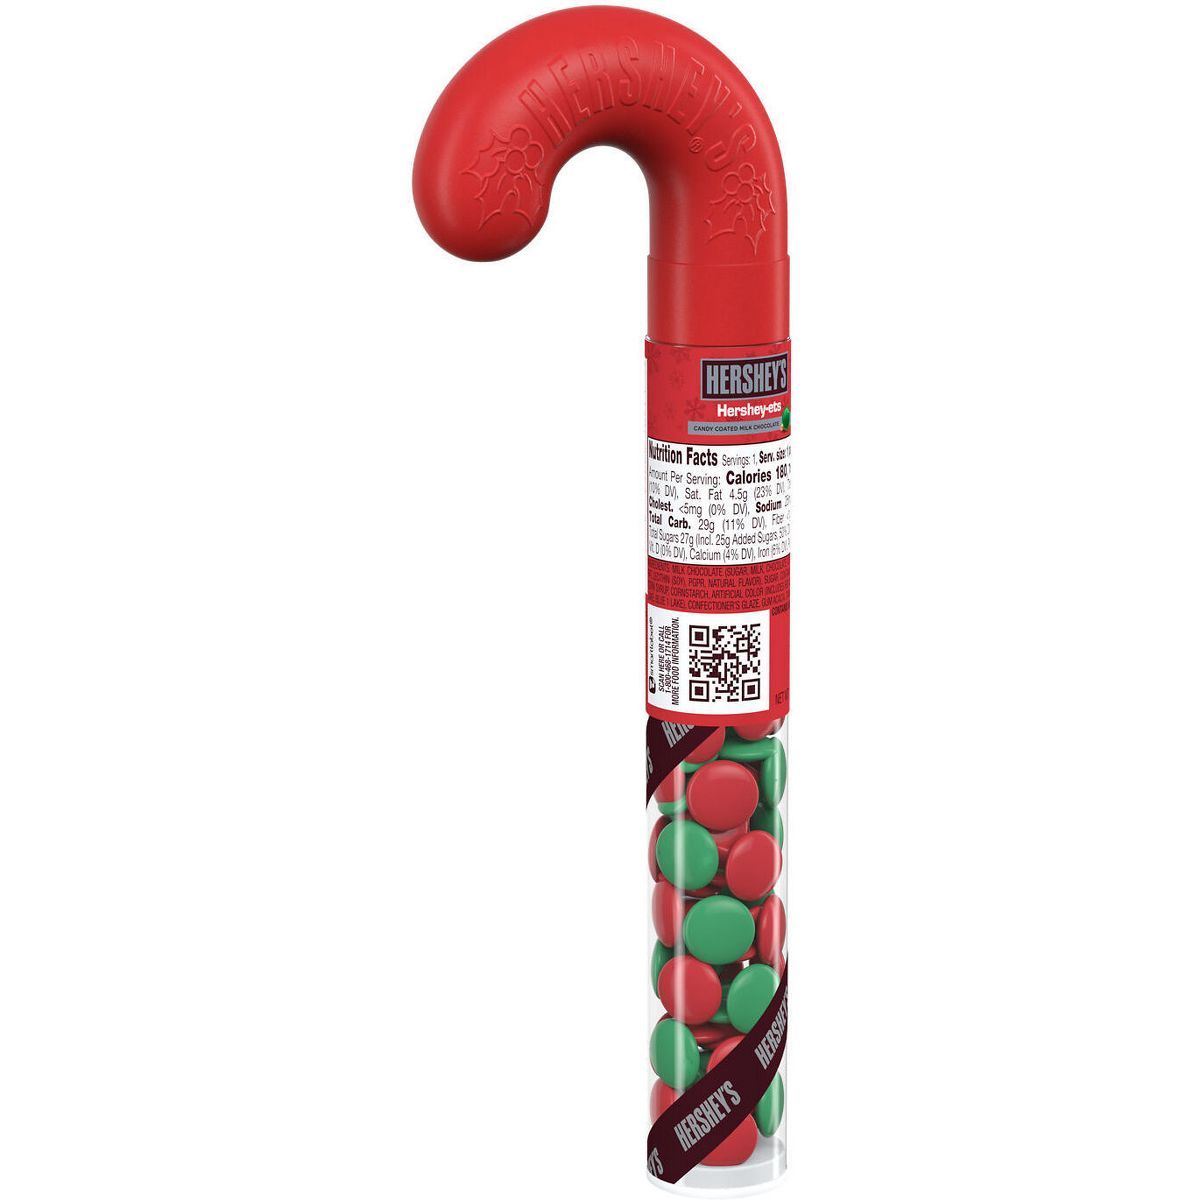 Hershey's Candy Coated Chocolate Filled Plastic Holiday Cane - 1.4oz | Target